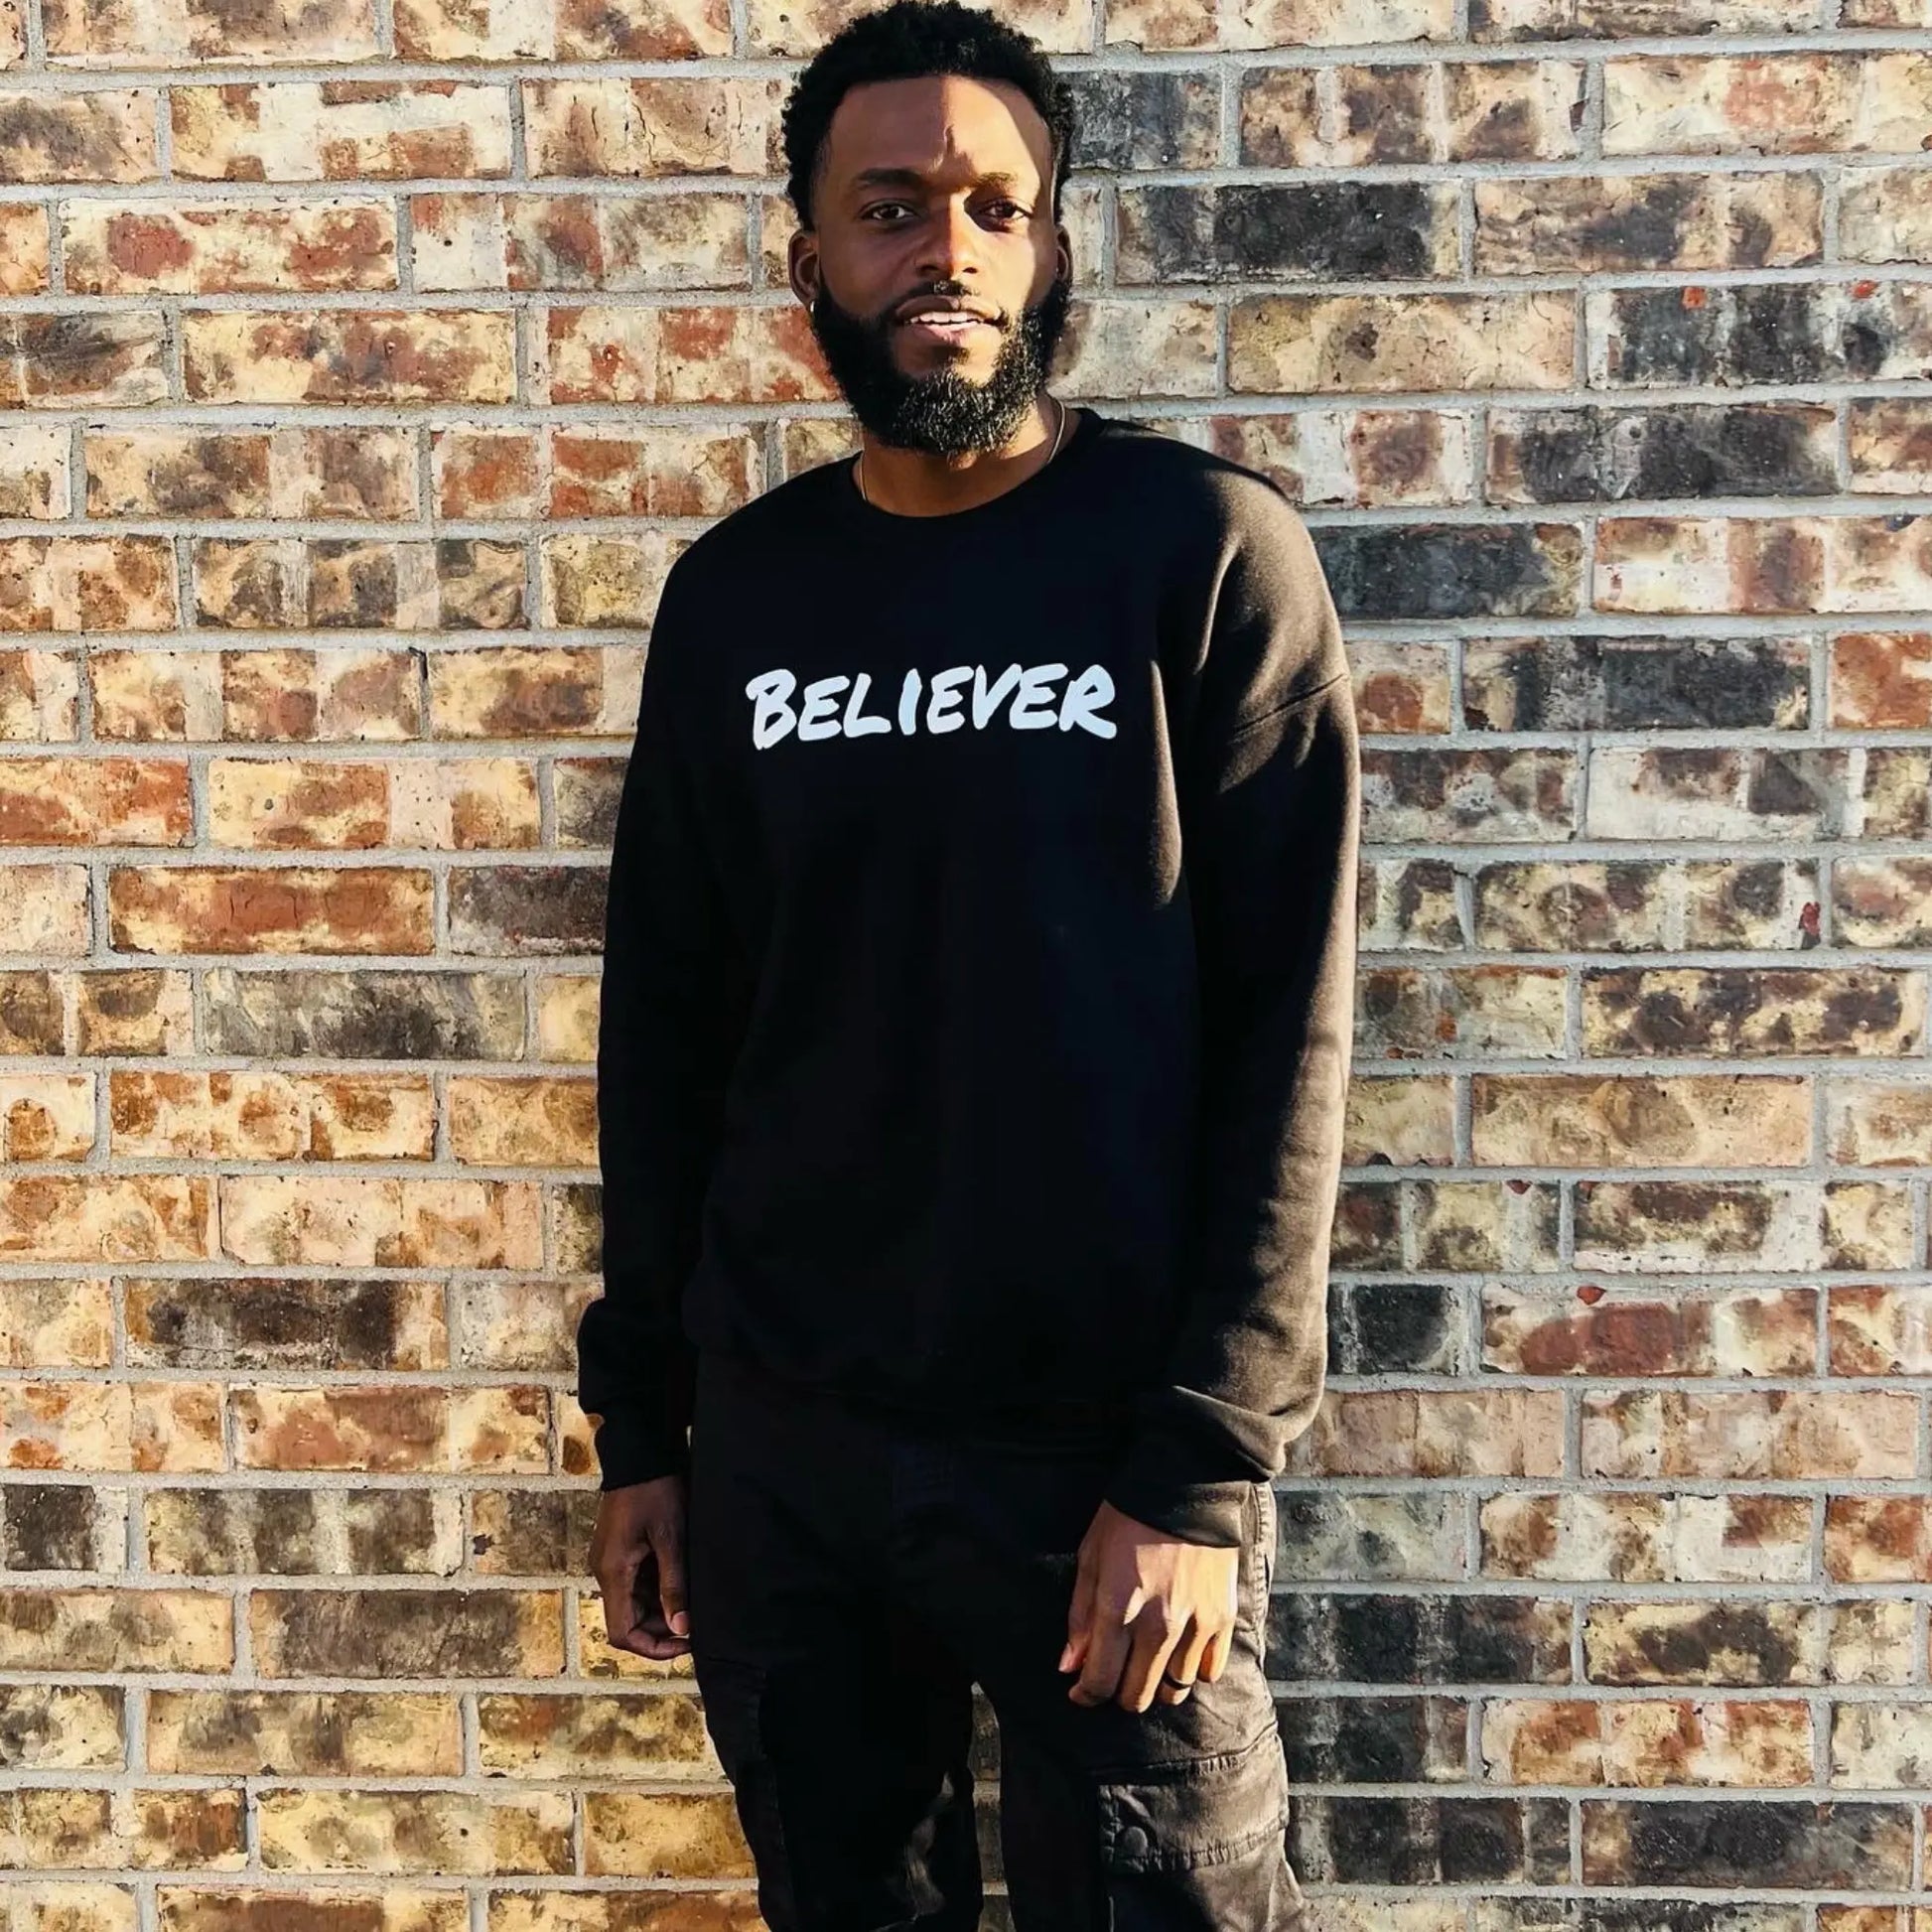 This Sweeatshirt is all black with a crew neck style. The words Believer are pressed on the shirt in bold white letters. Believer is written across the chest, stretching from sholder to shoulder. The sweatshirt this comftorable and fitted. Size up for a look. Edit alt text. On a Nuetral Colored back ground. The back reads John 3:16 on the tail of the sweatshirt.